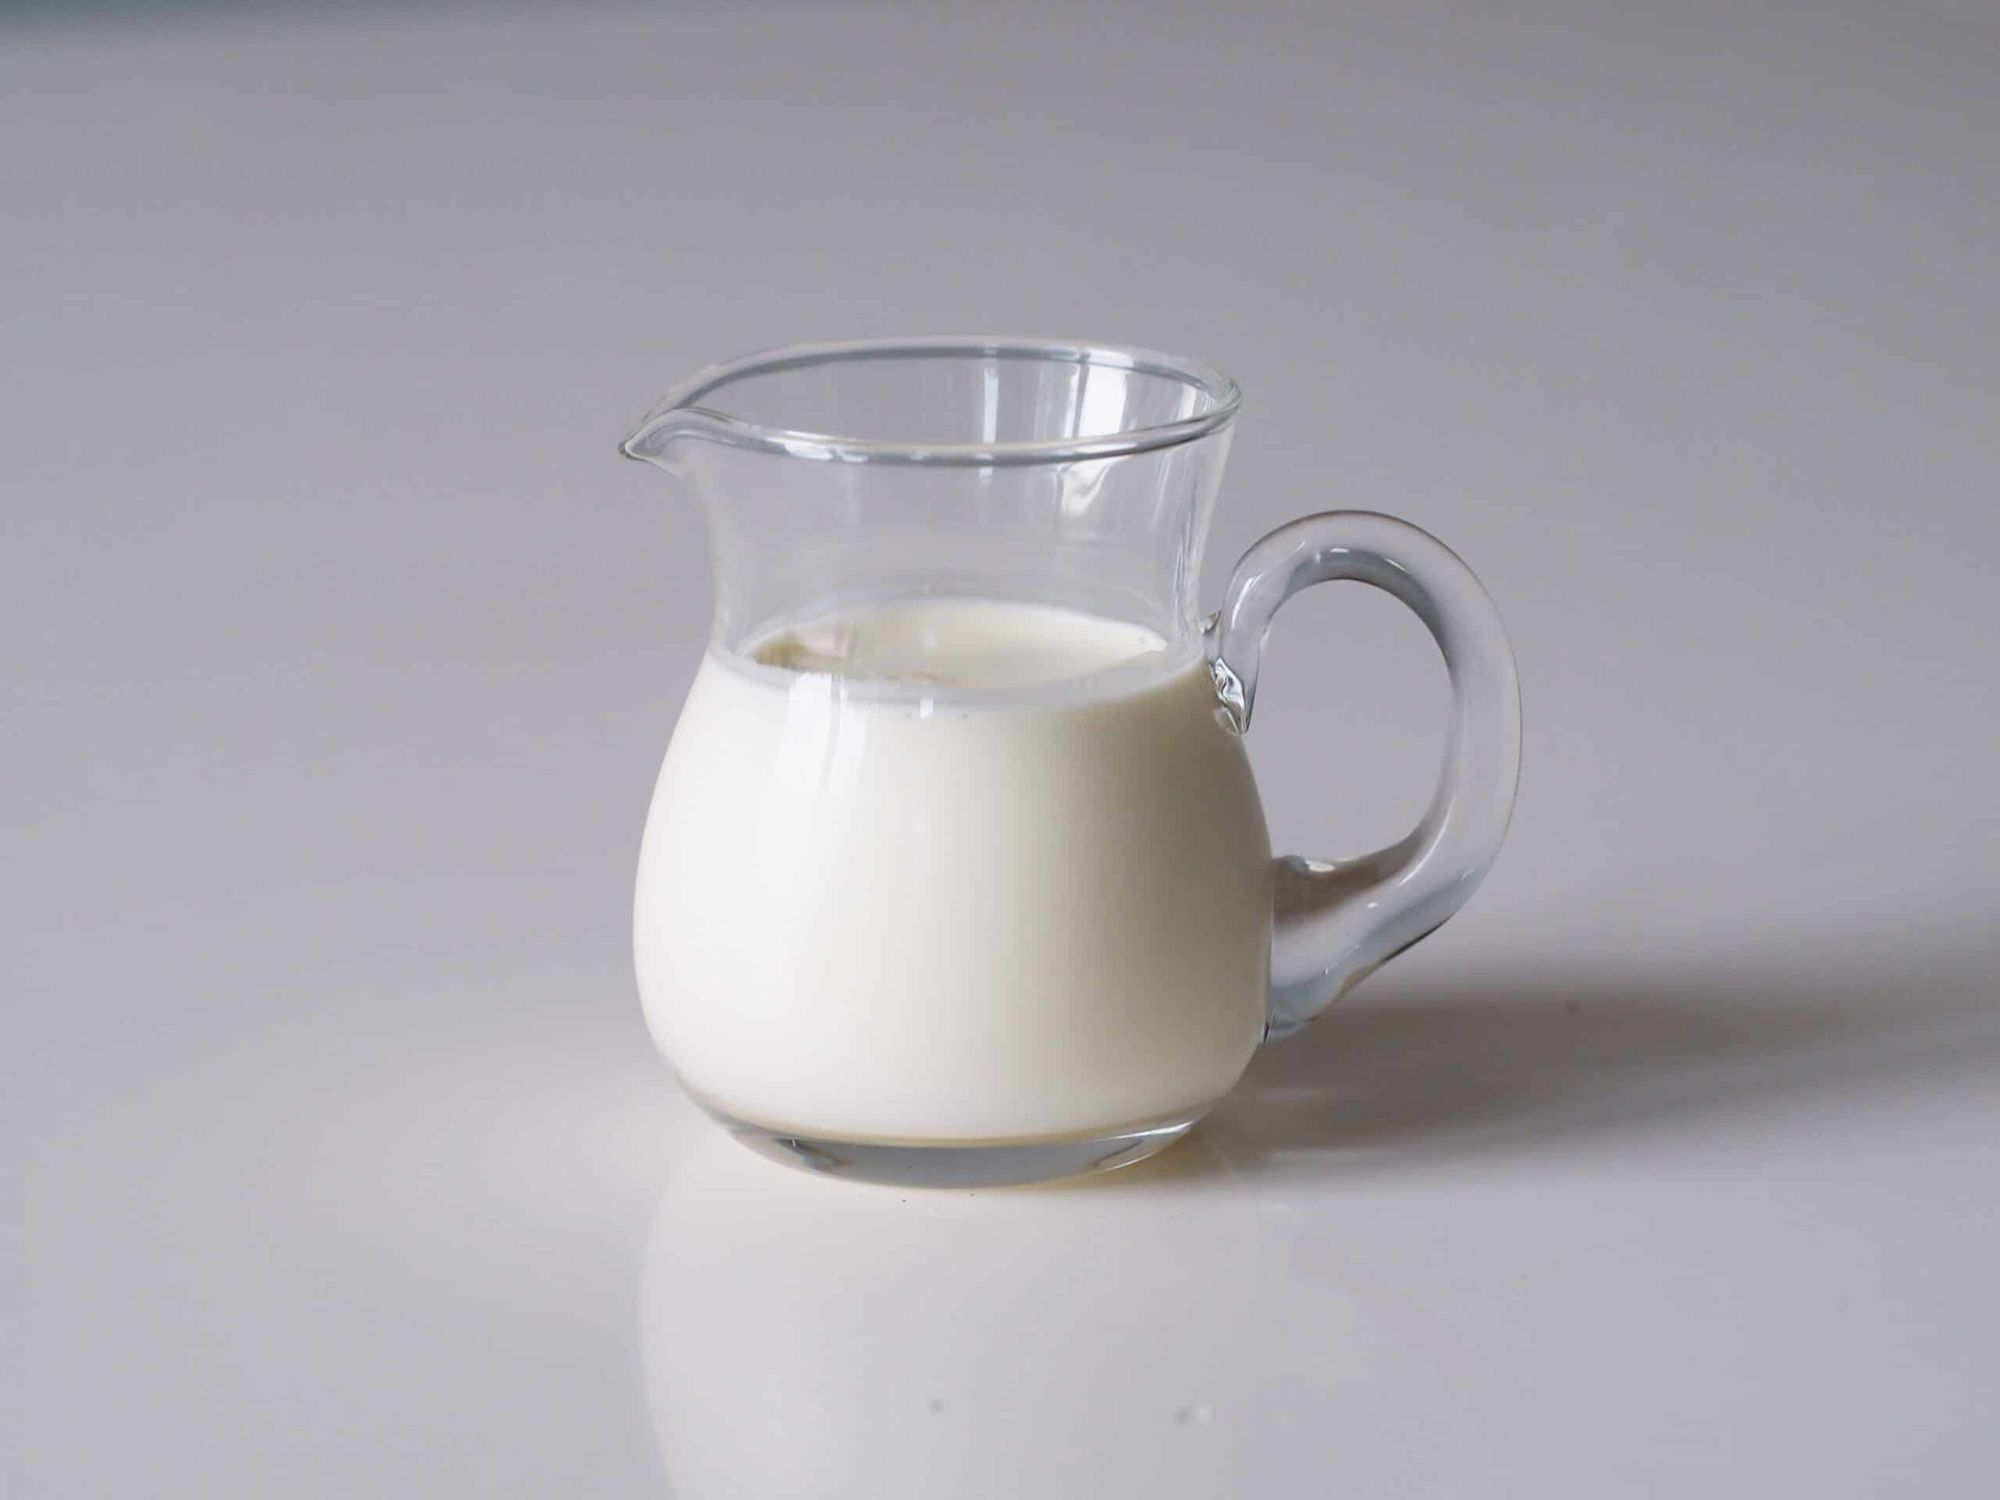 Best Times to Drink Milk, Based on Different Purposes - Natural